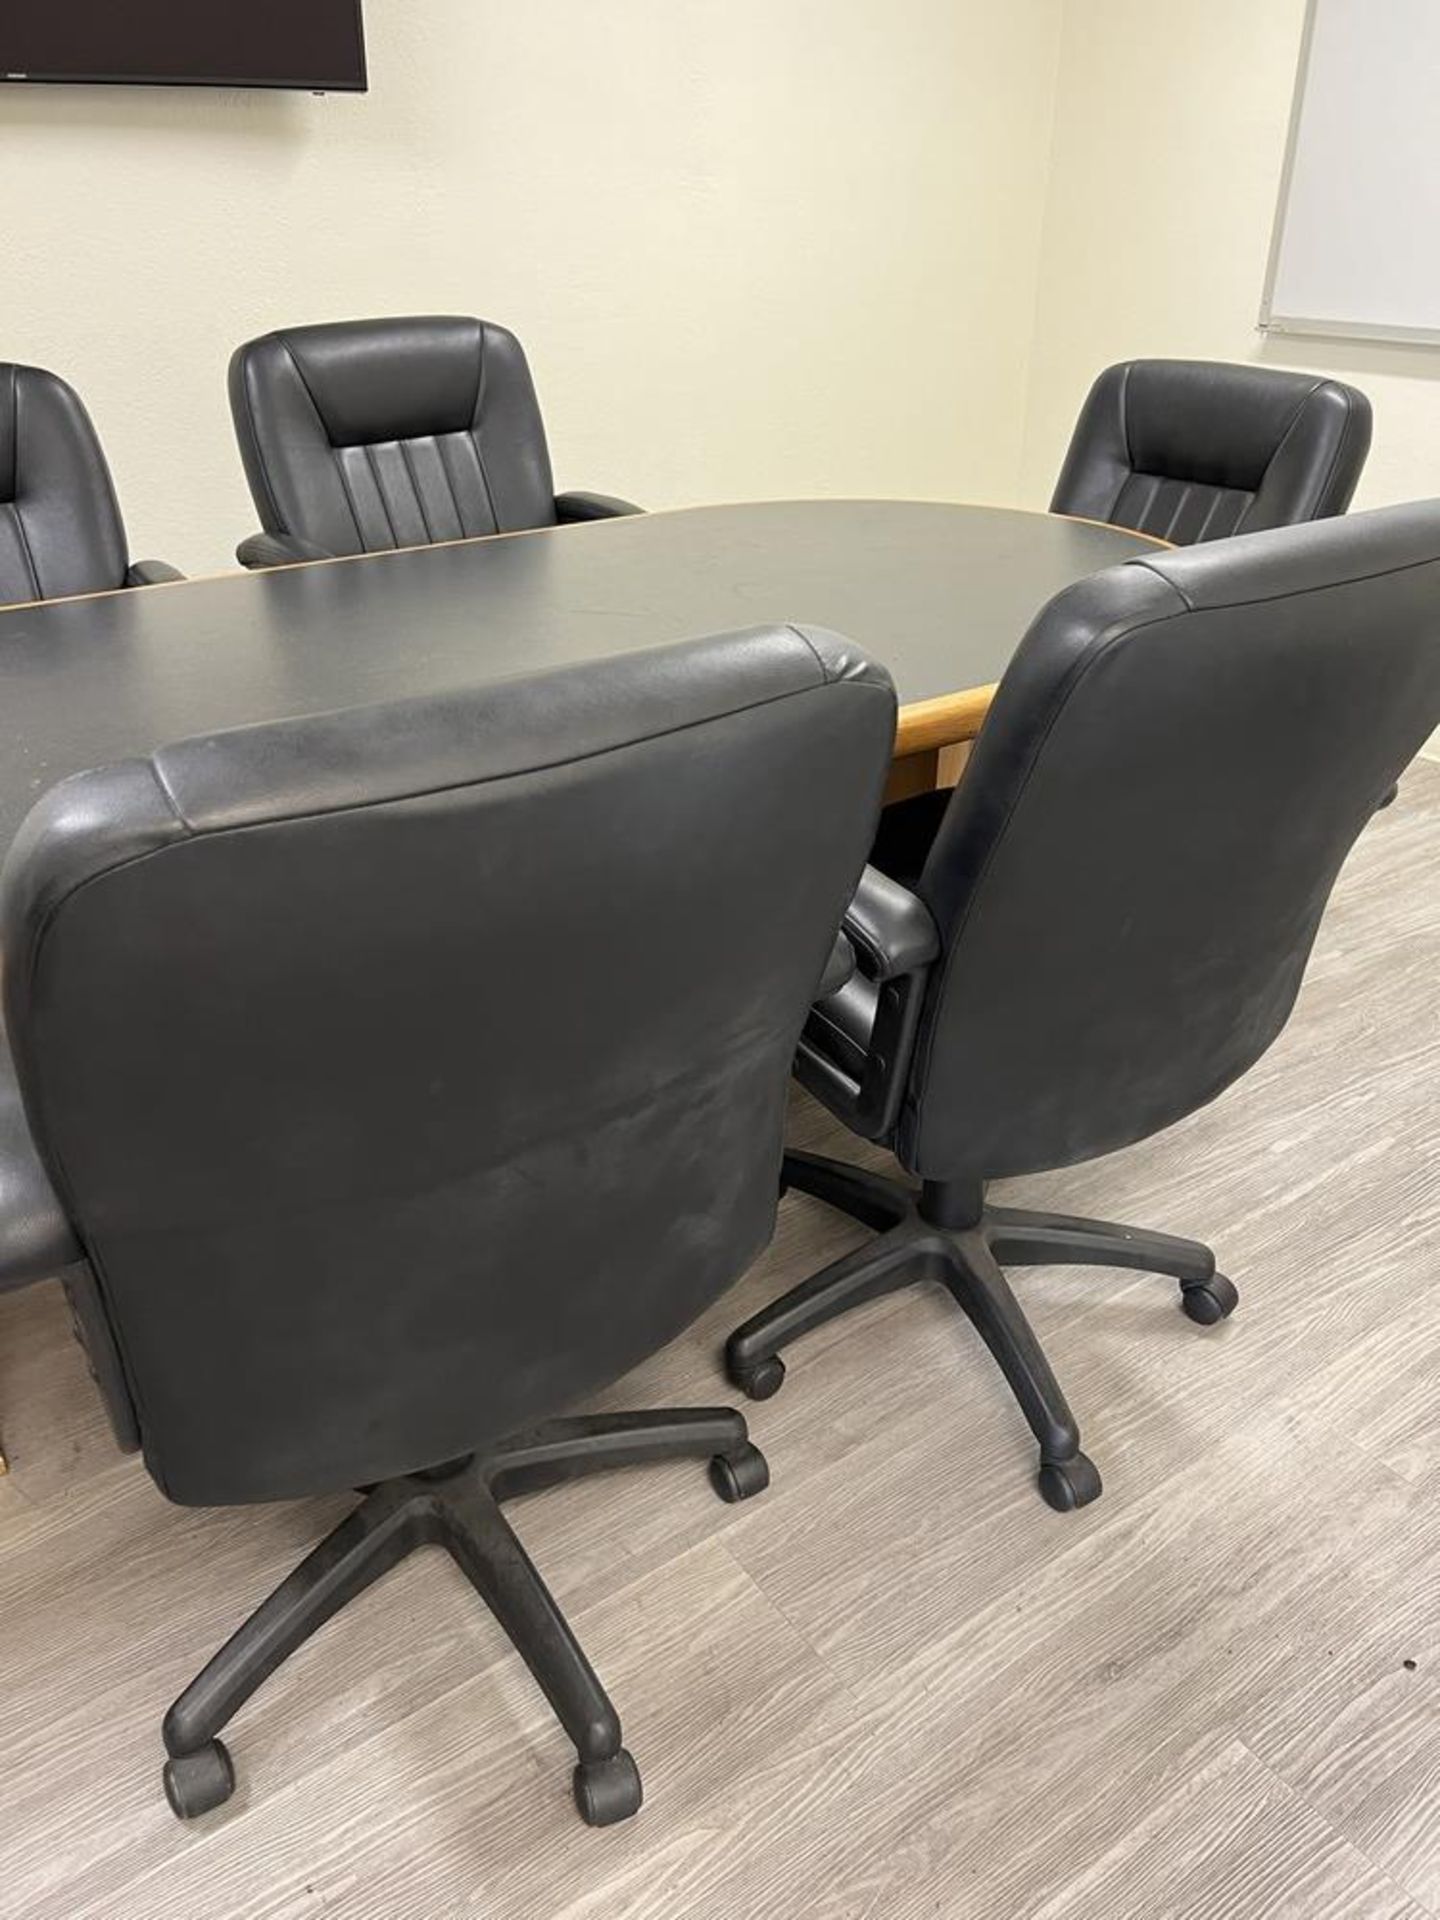 Conference Table With (6) Chairs 98" x 41 1/2" x 30" - Image 3 of 6